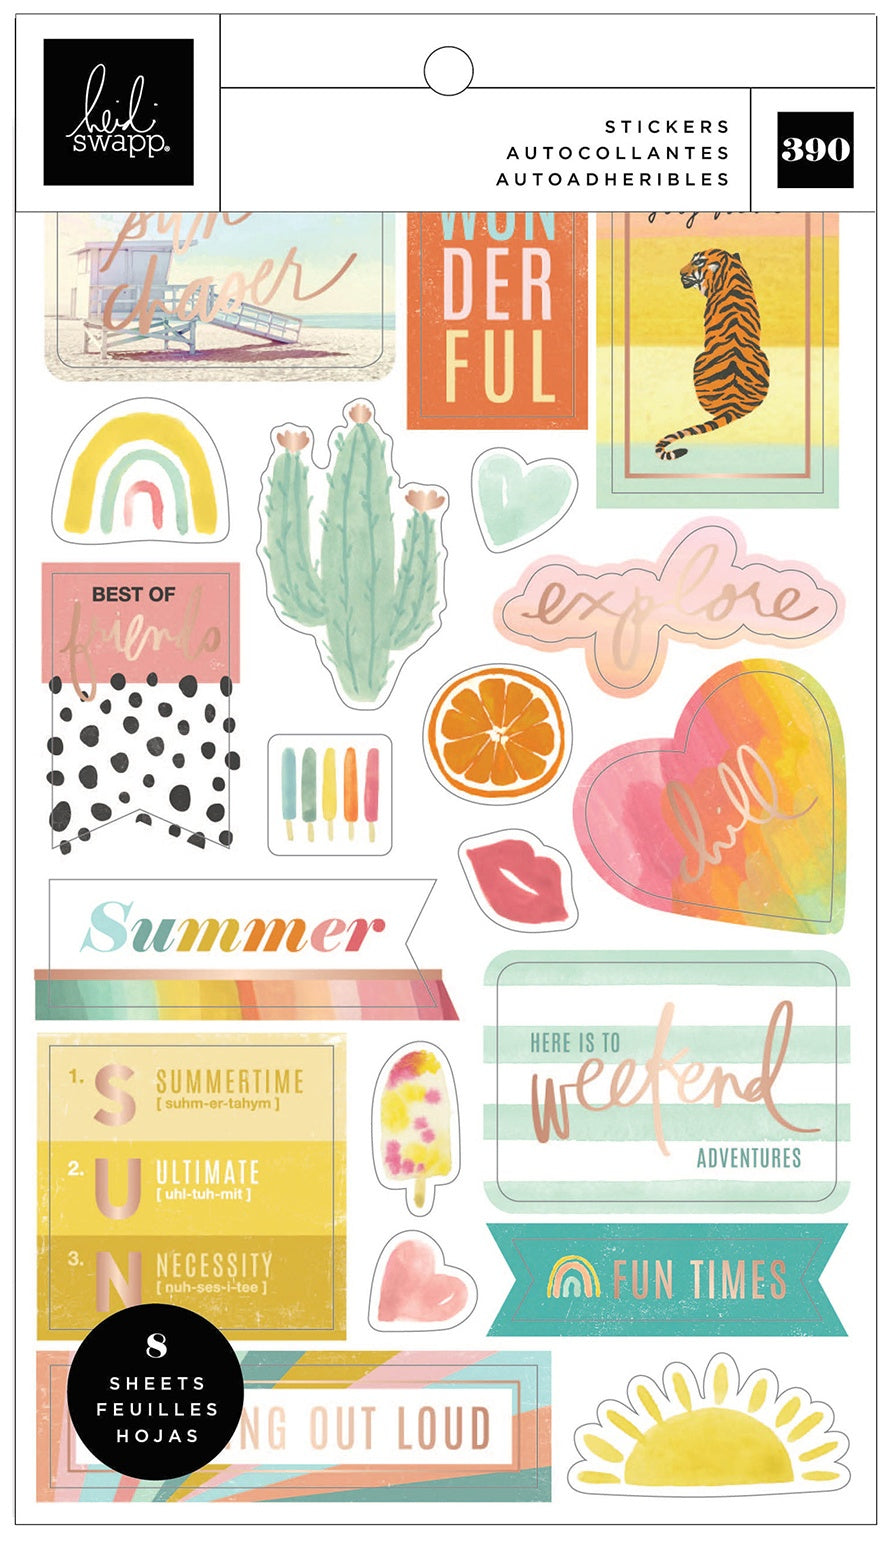 Heidi Swapp Sun Chaser 12x 12 Paper Sweet Thing (25 piece)